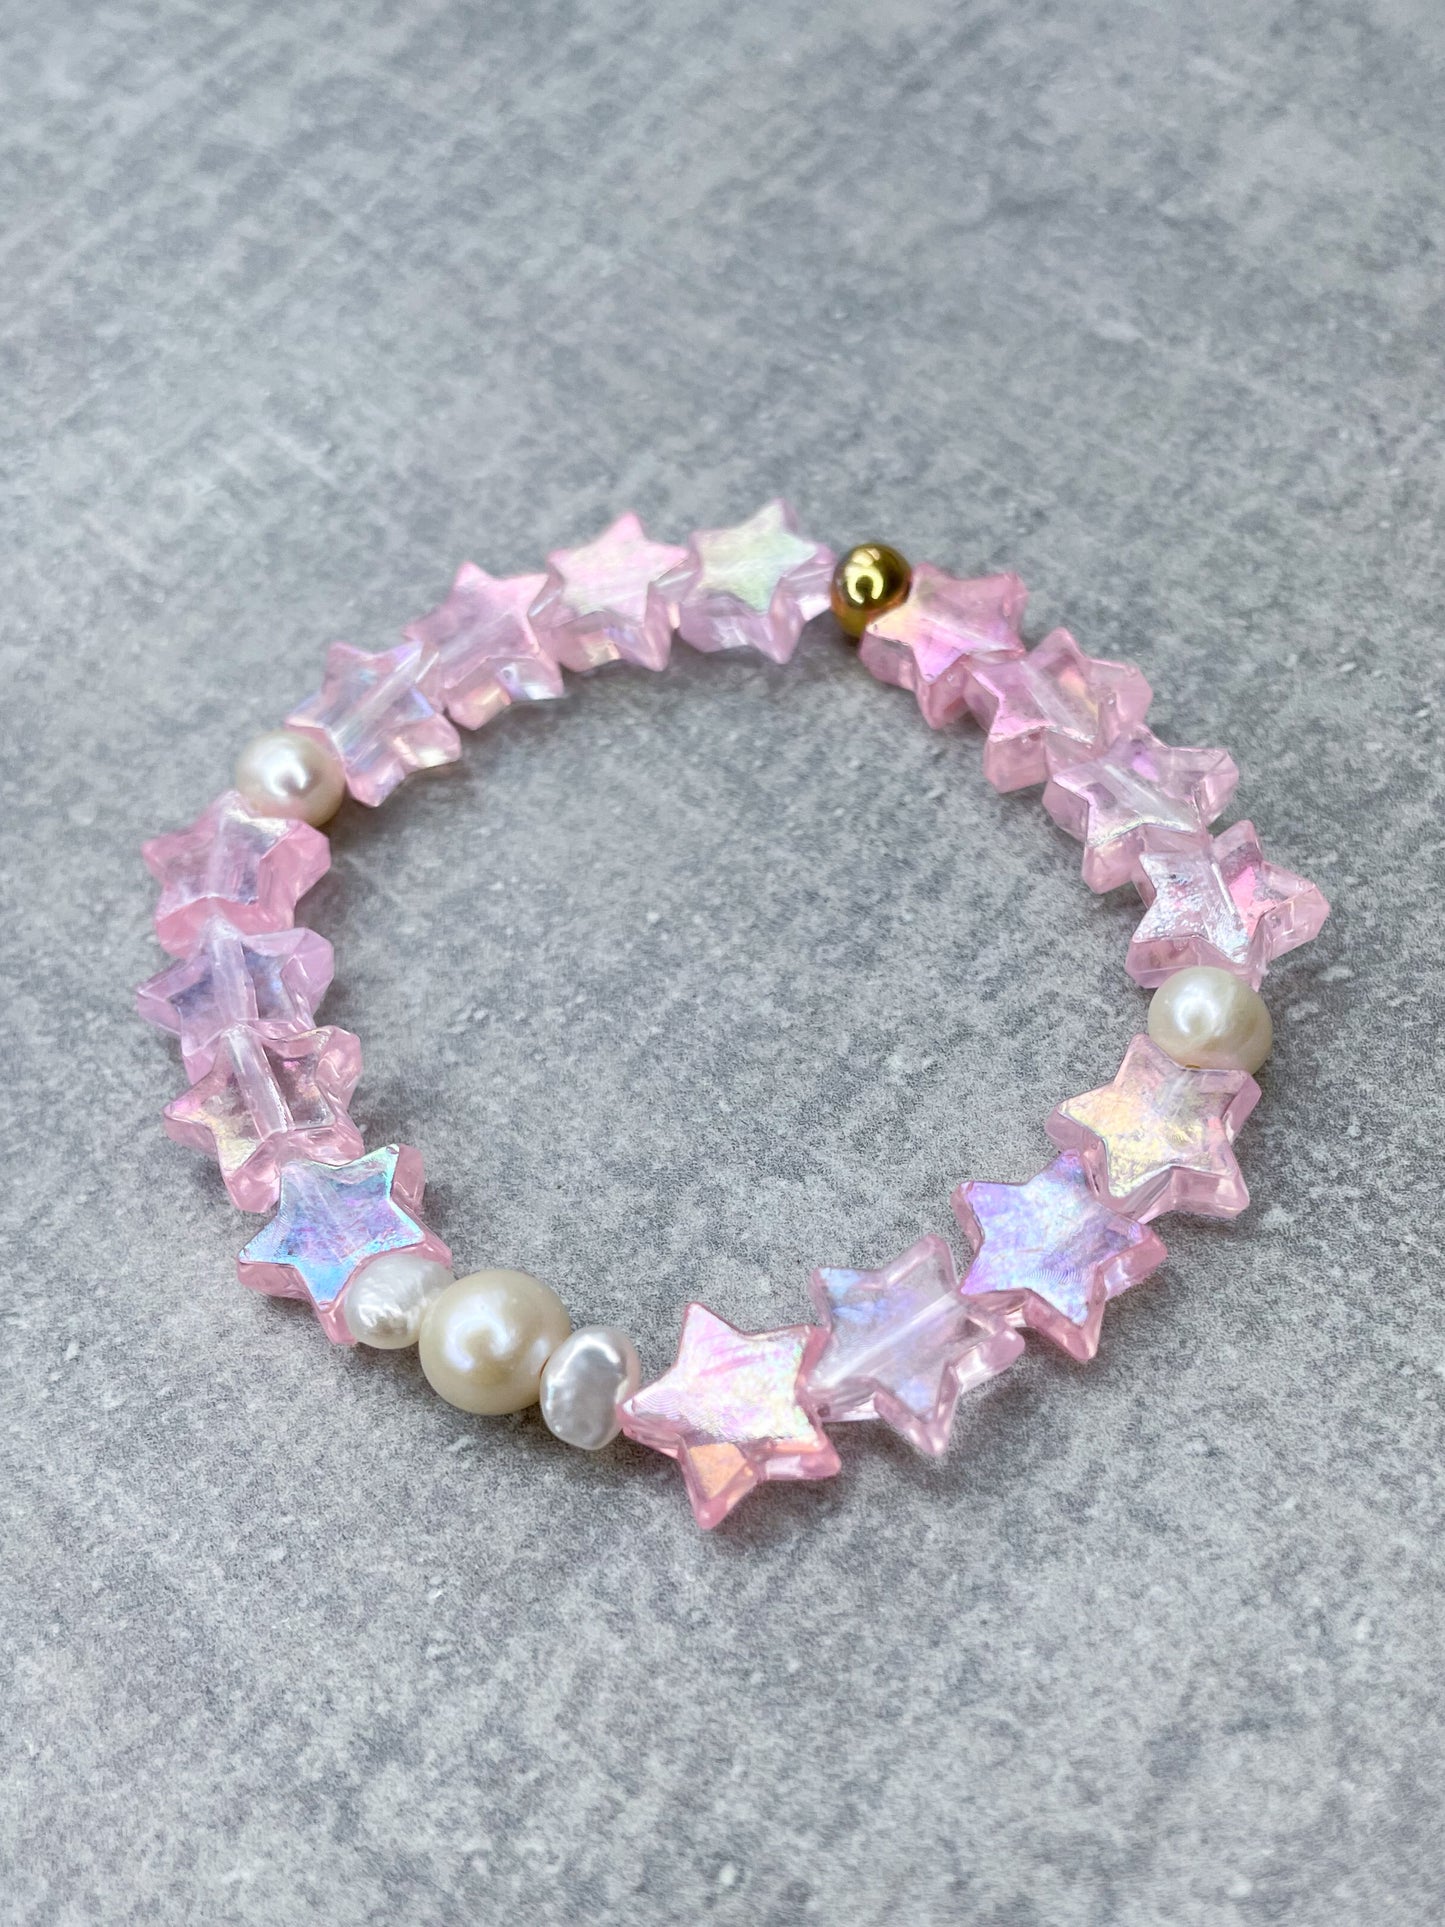 Star and Freshwater Pearl Bracelet "Stars & Pearls"